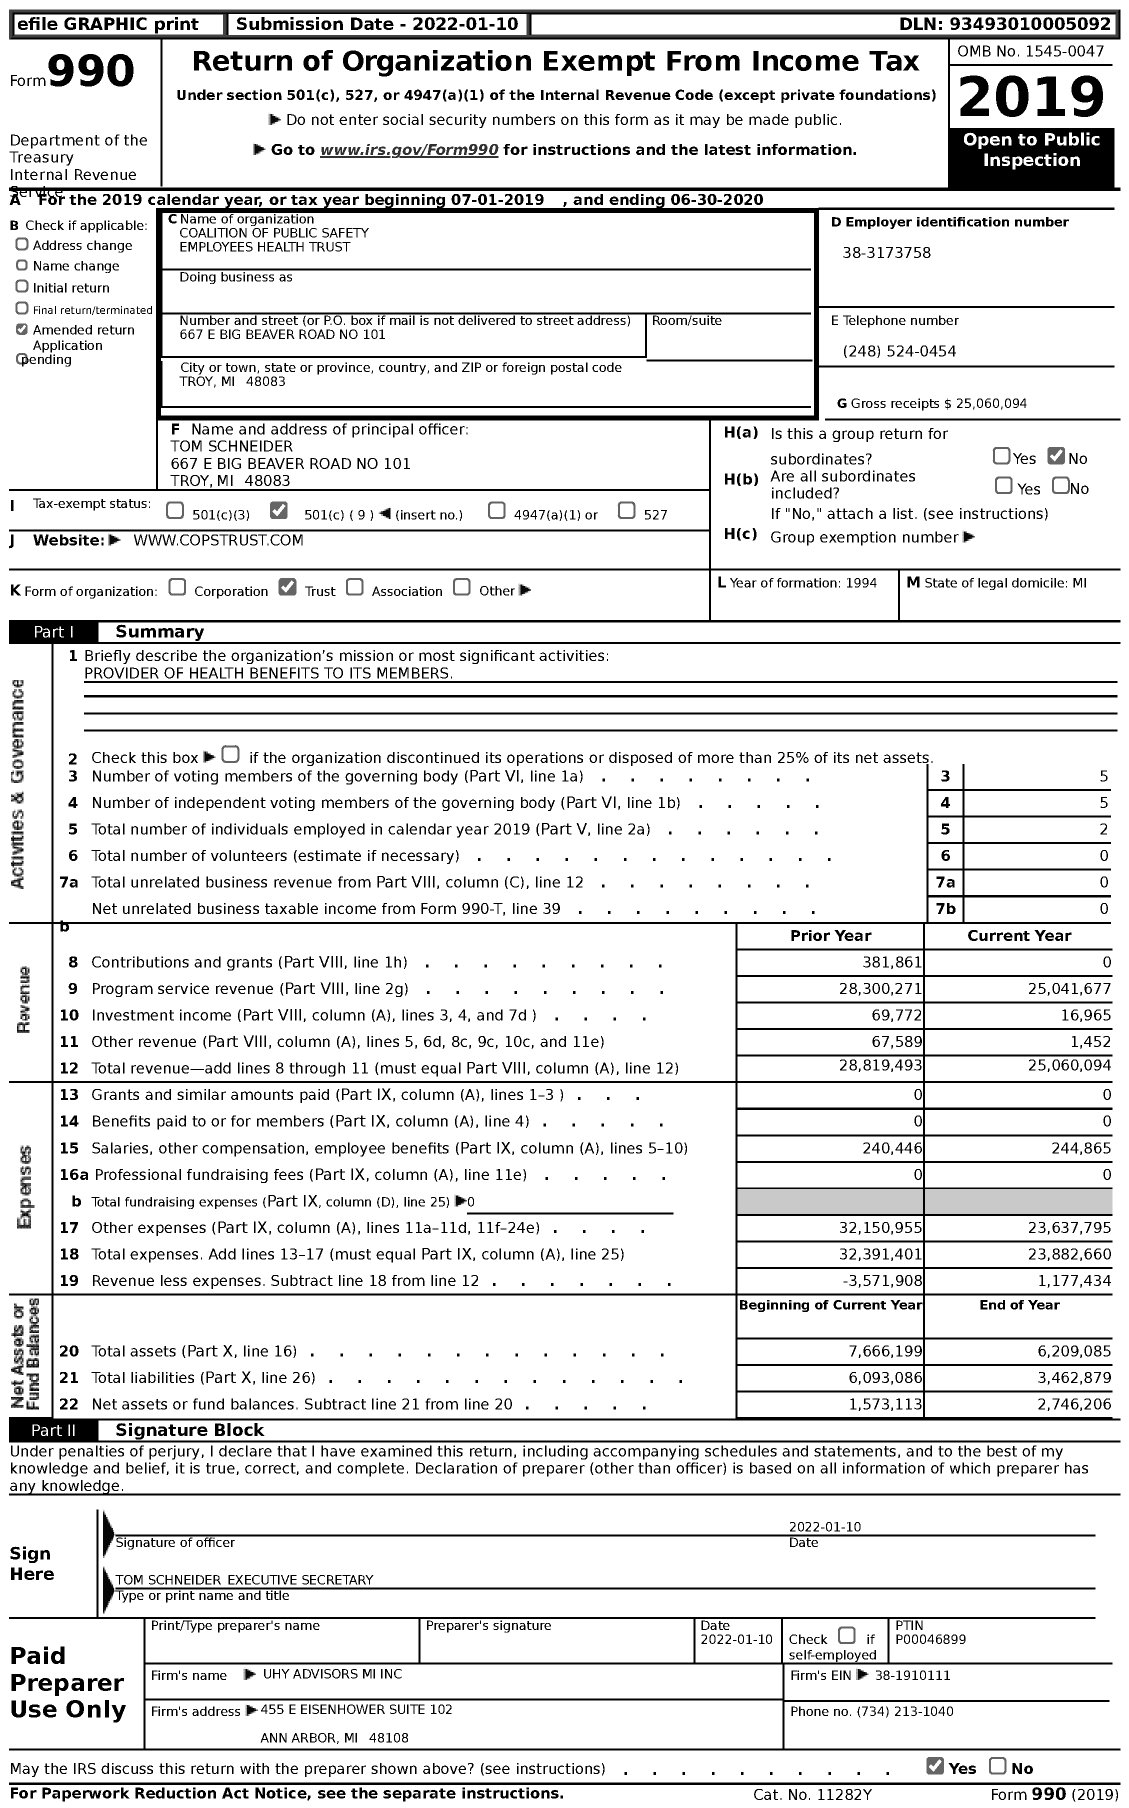 Image of first page of 2019 Form 990 for Coalition of Public Safety Employees Health Trust